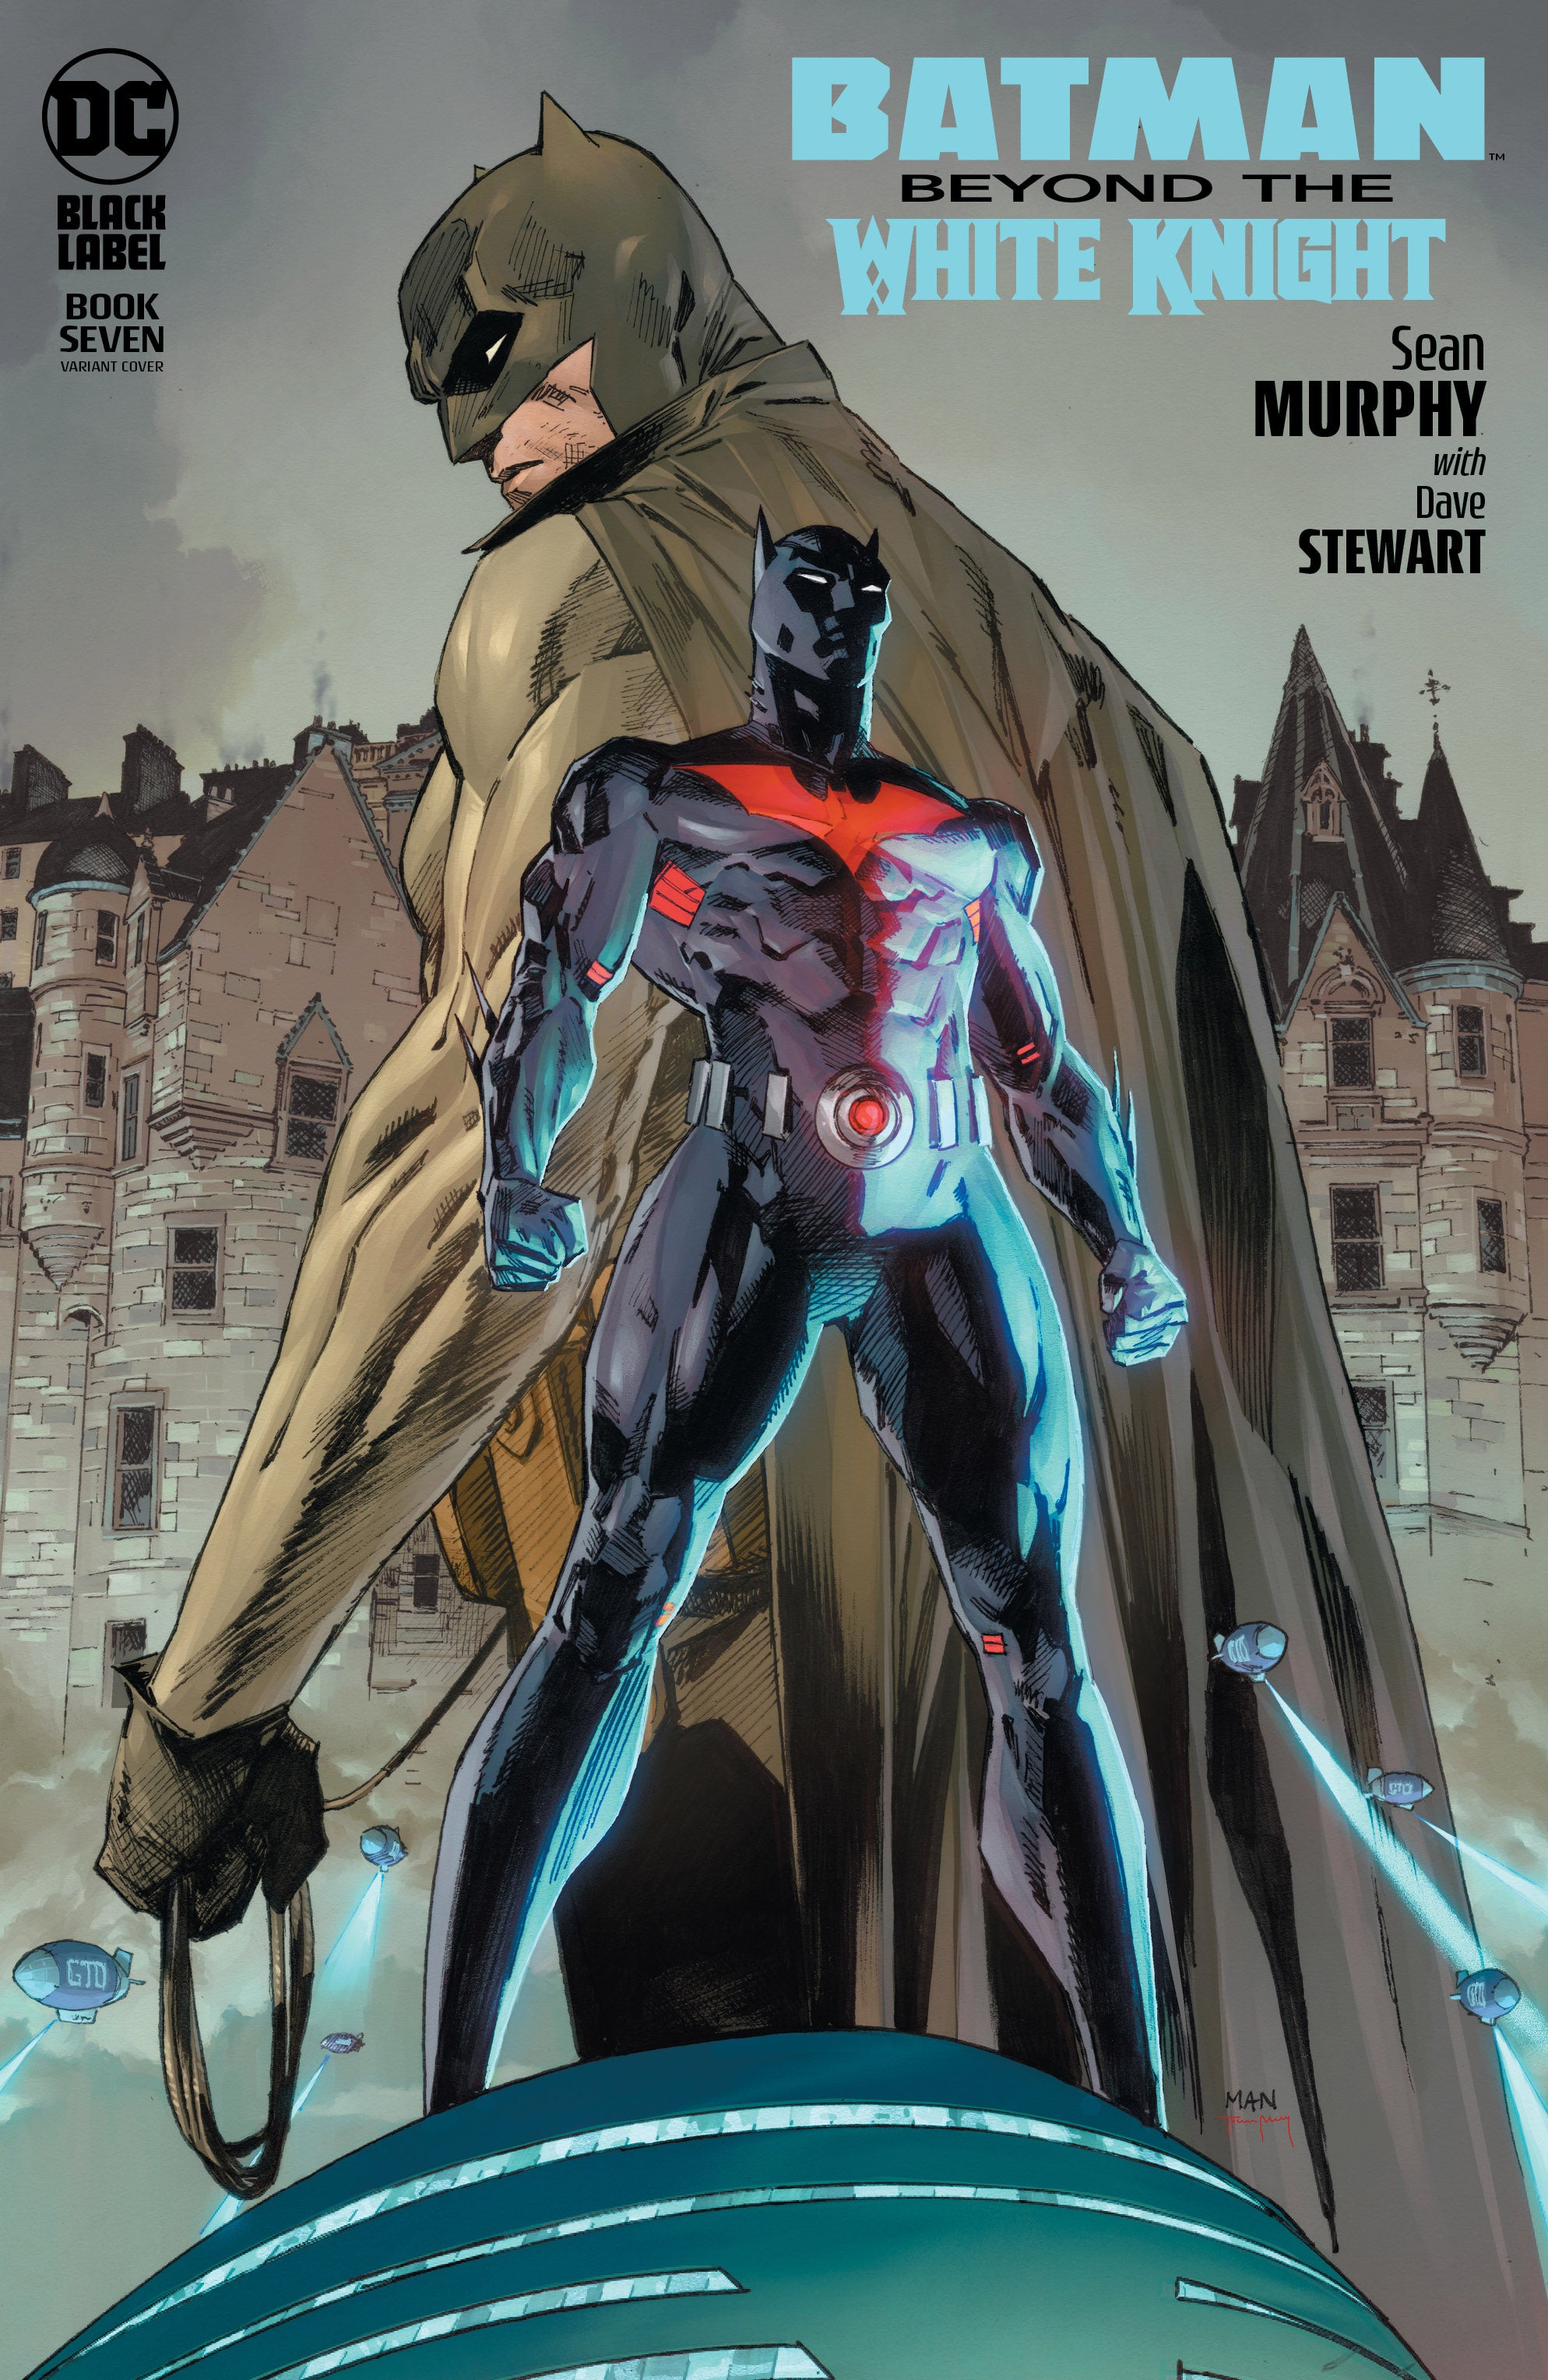 Batman Beyond The White Knight Issue 3  Read Batman Beyond The White  Knight Issue 3 comic online in high quality. Read Full Comic online for  free - Read comics online in